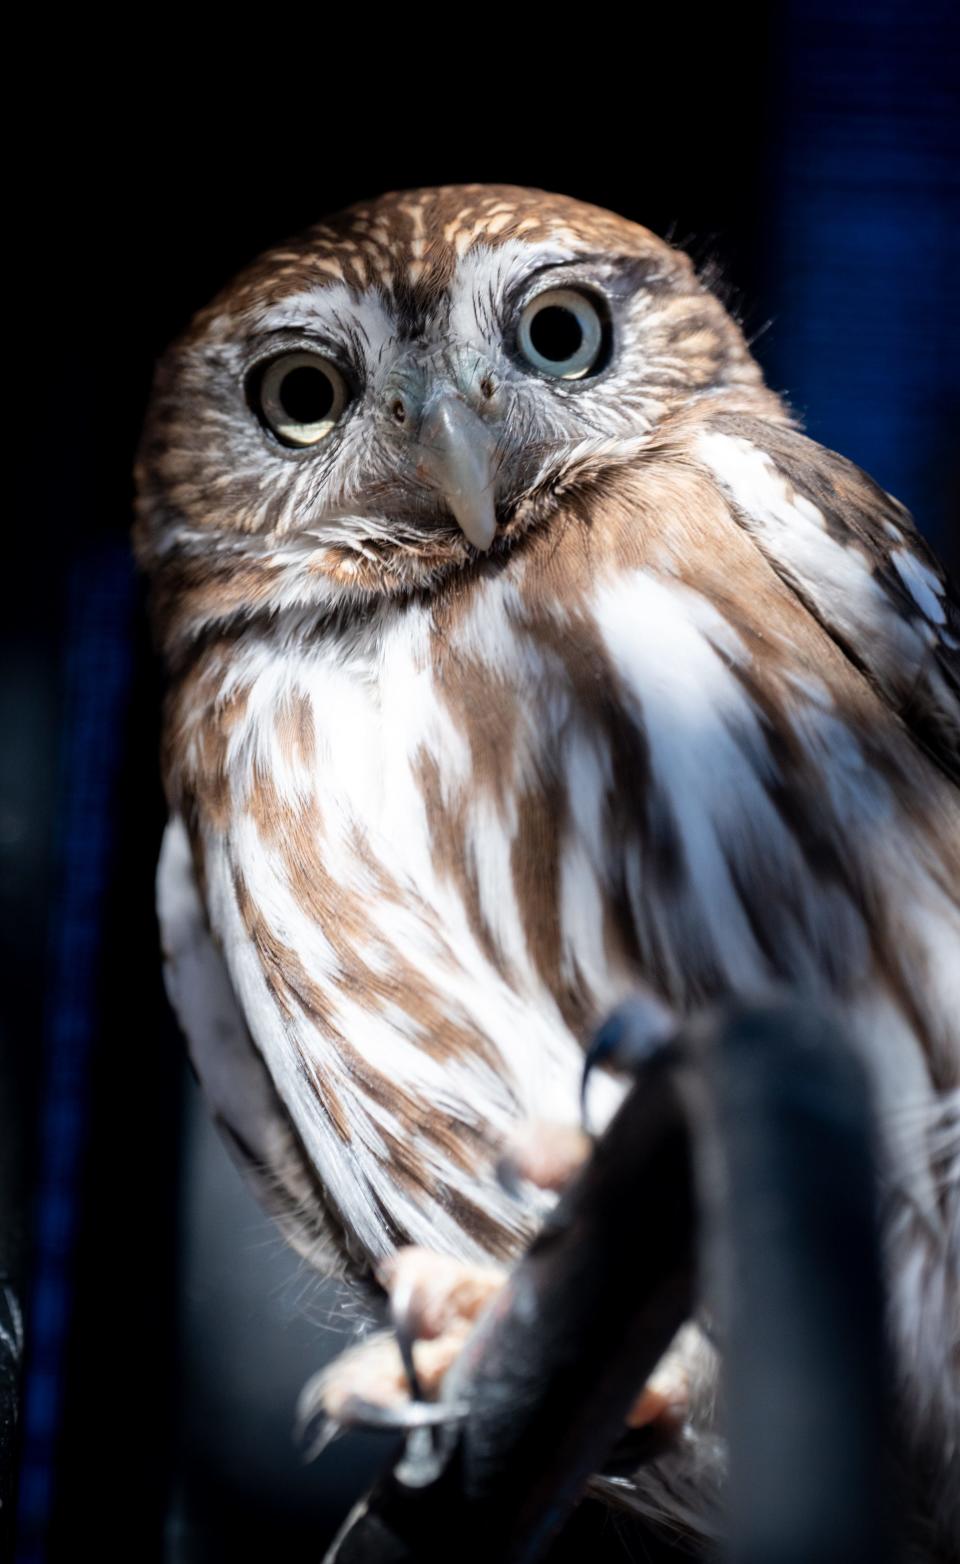 A pygmy-owl, February 18, 2022, in its enclosure in the Multi-Species Conservation Support Center at the Phoenix Zoo, 455 N. Galvin Parkway, Phoenix, Arizona.